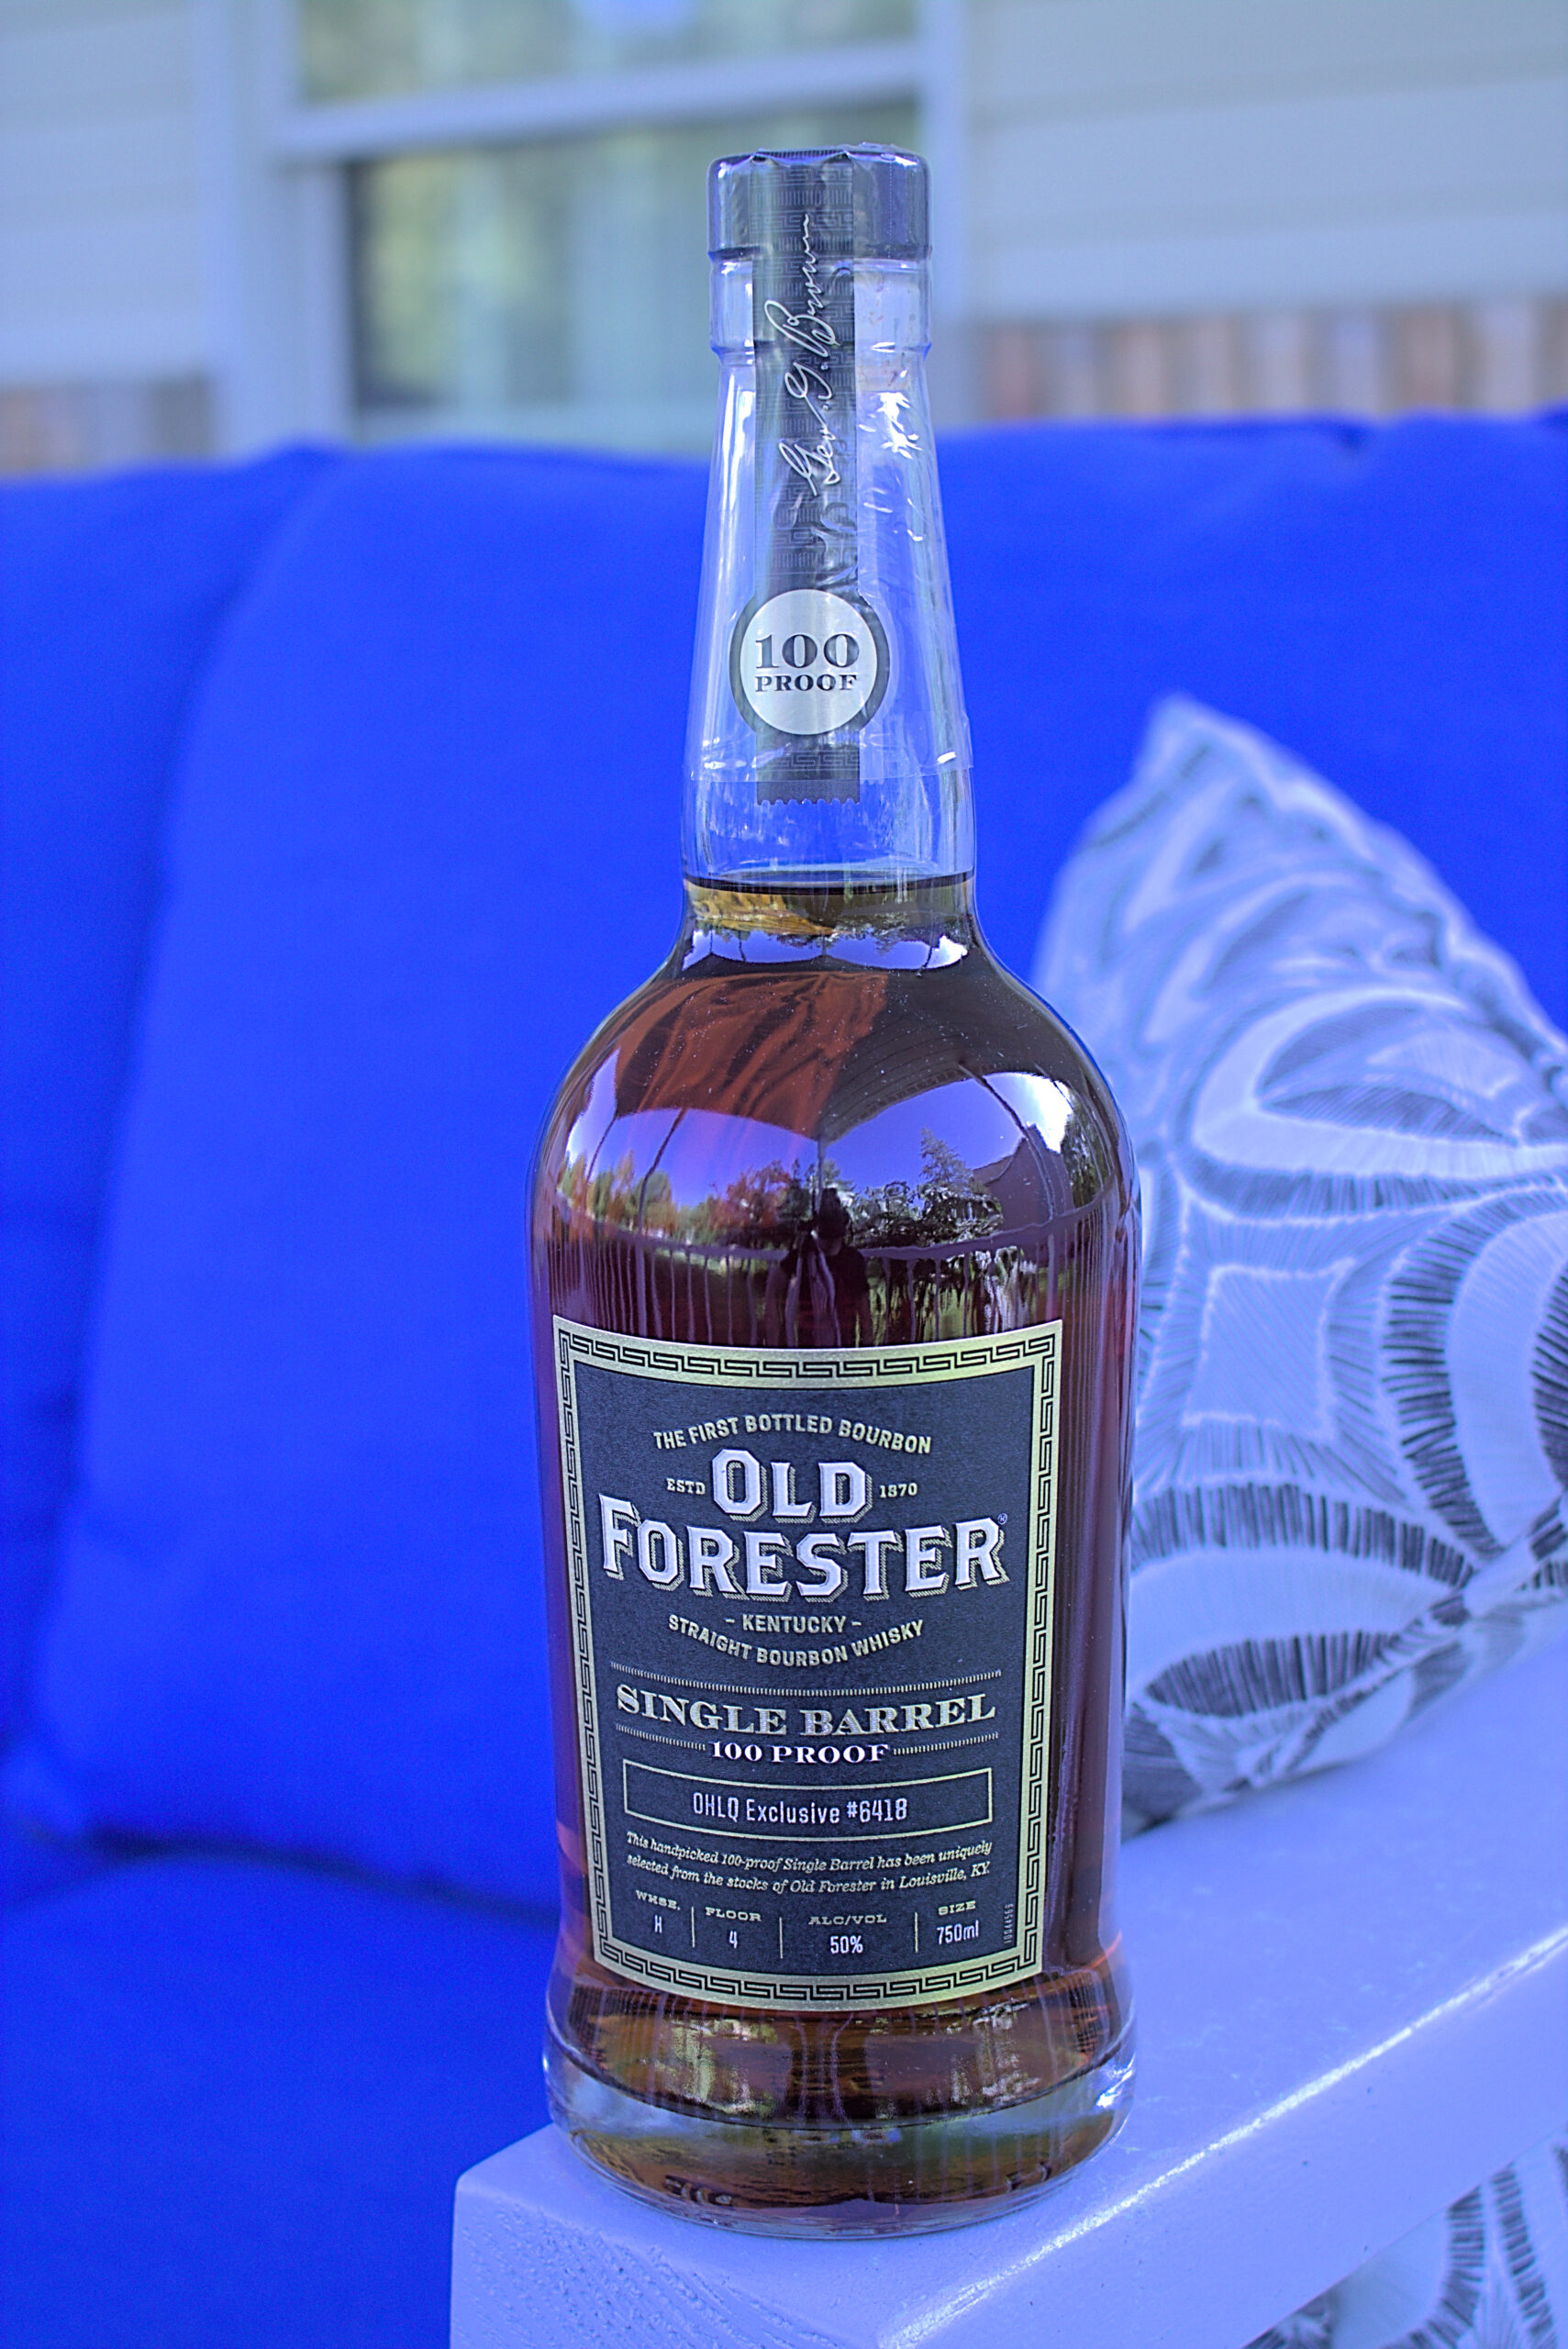 Old Forester Single Barrel – OHLQ Exclusive #6418